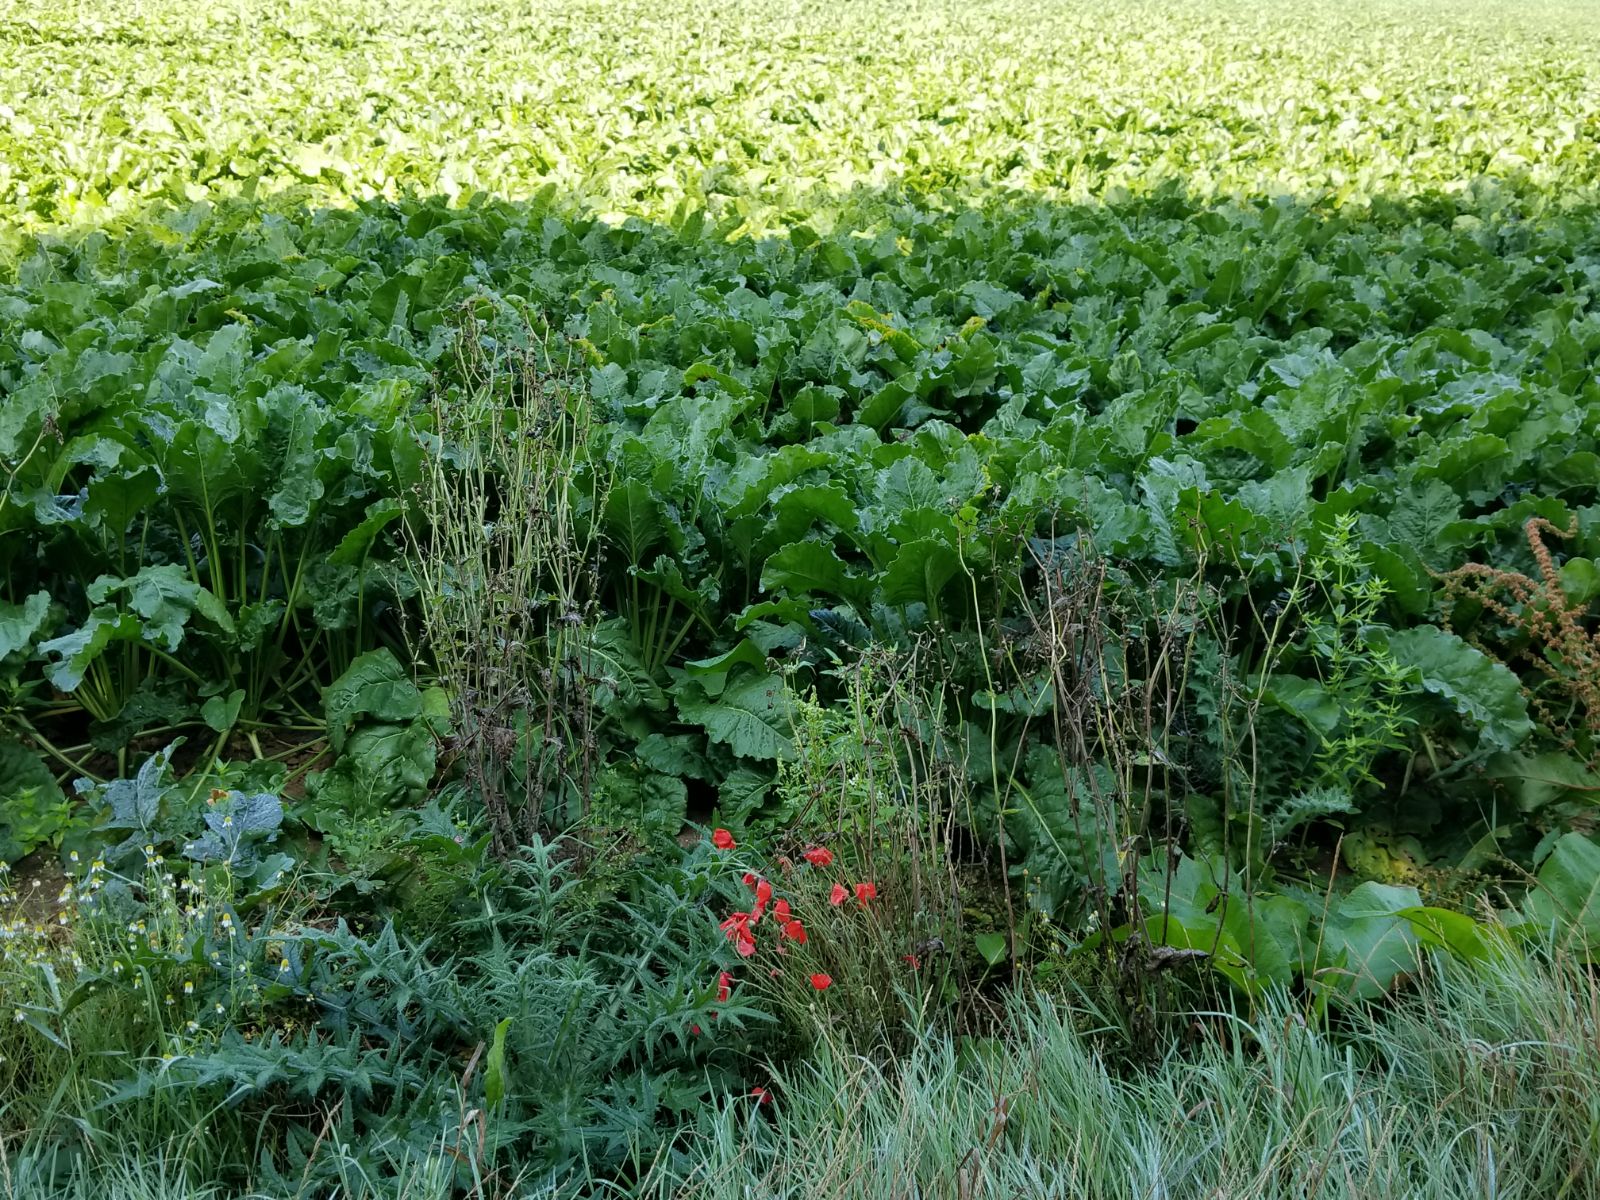 Photo of a field covered in rows of green plants interspersed with flowers.